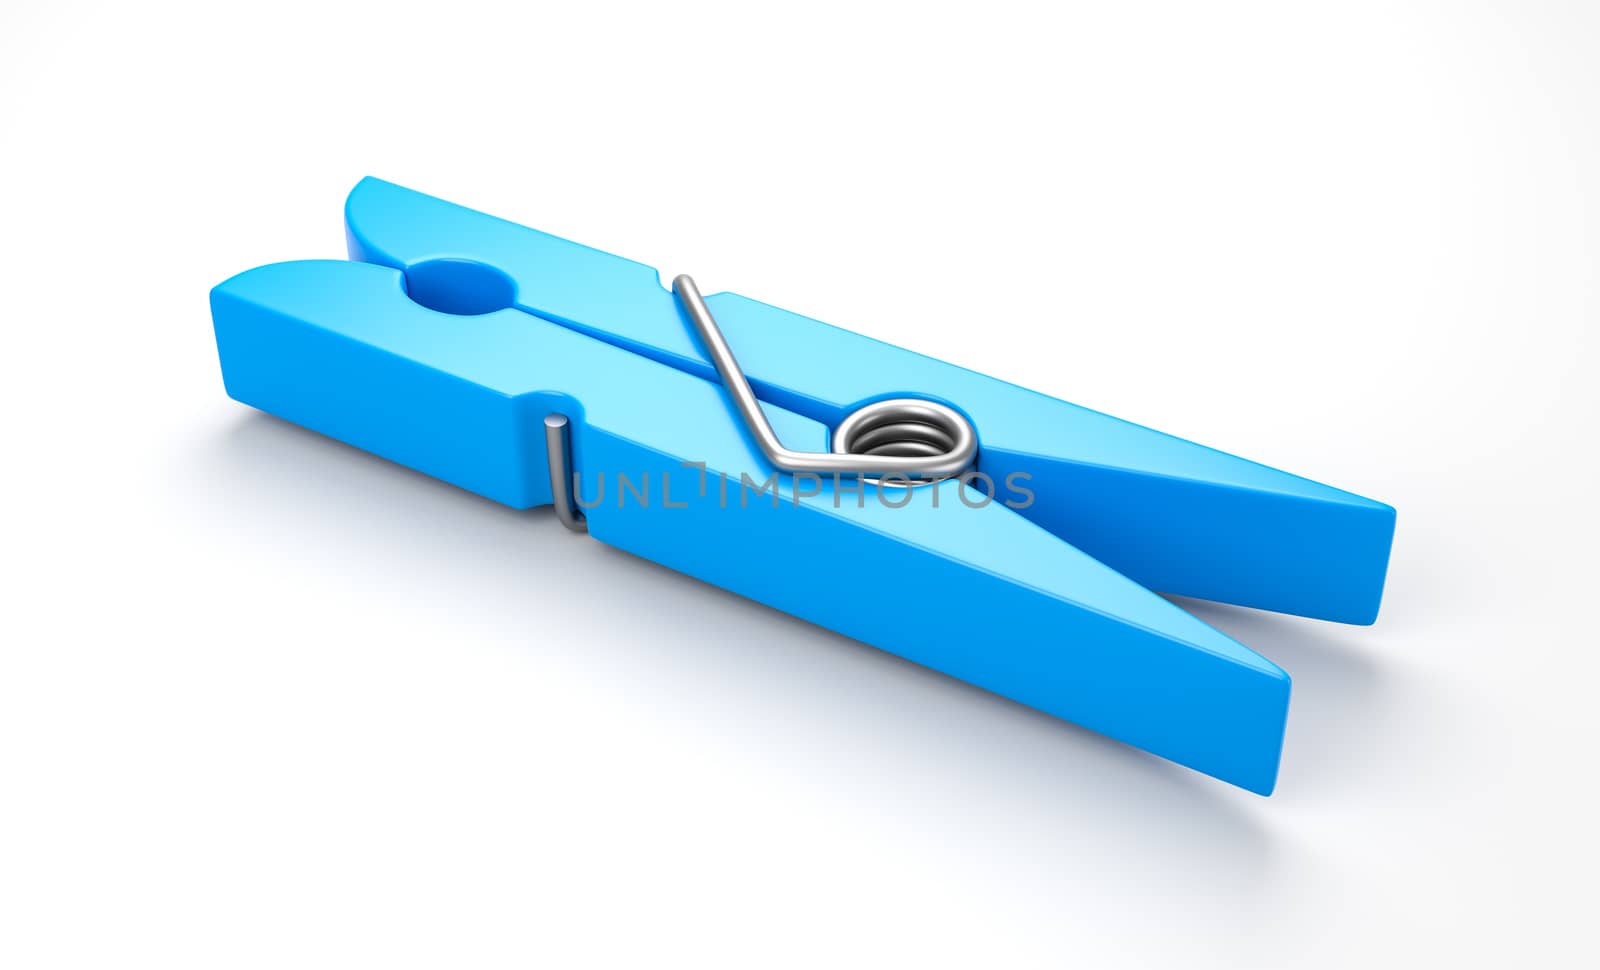 One Blue Plastic Clothespin on White Background 3D Illustration